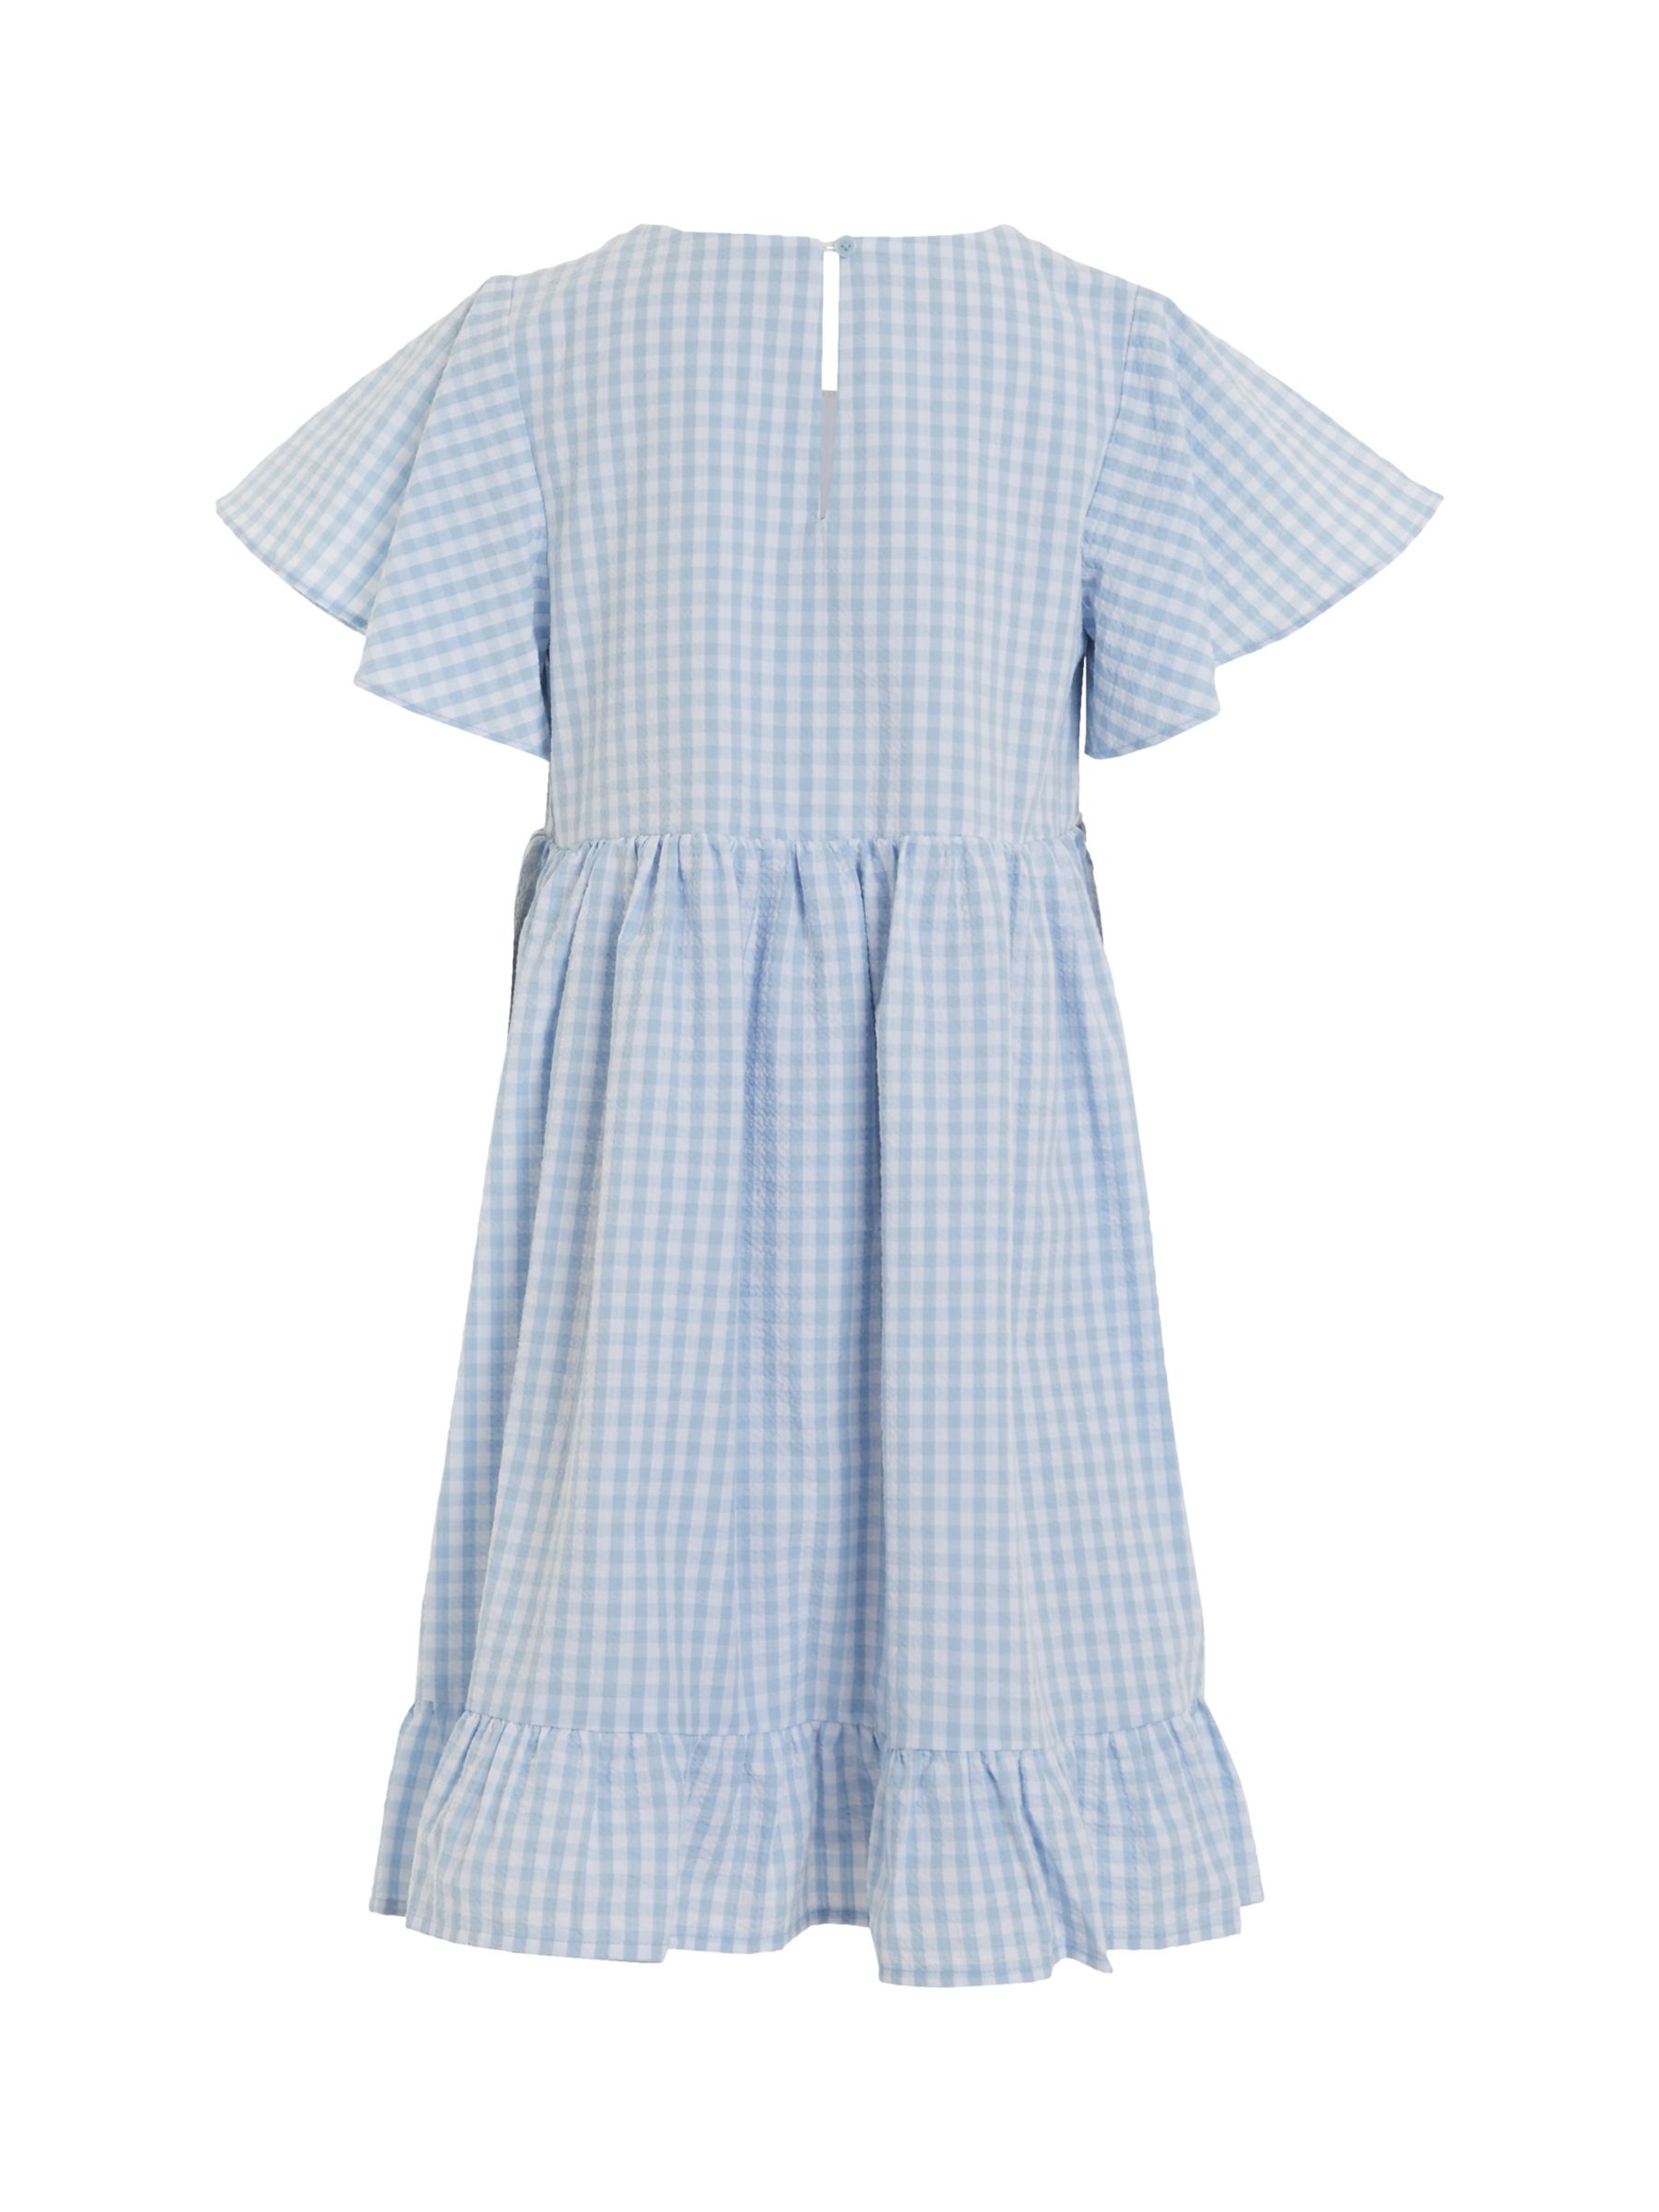 Tommy Hilfiger Kids' Flag Gingham Flare Dress, Breezy Blue Check, 5 years